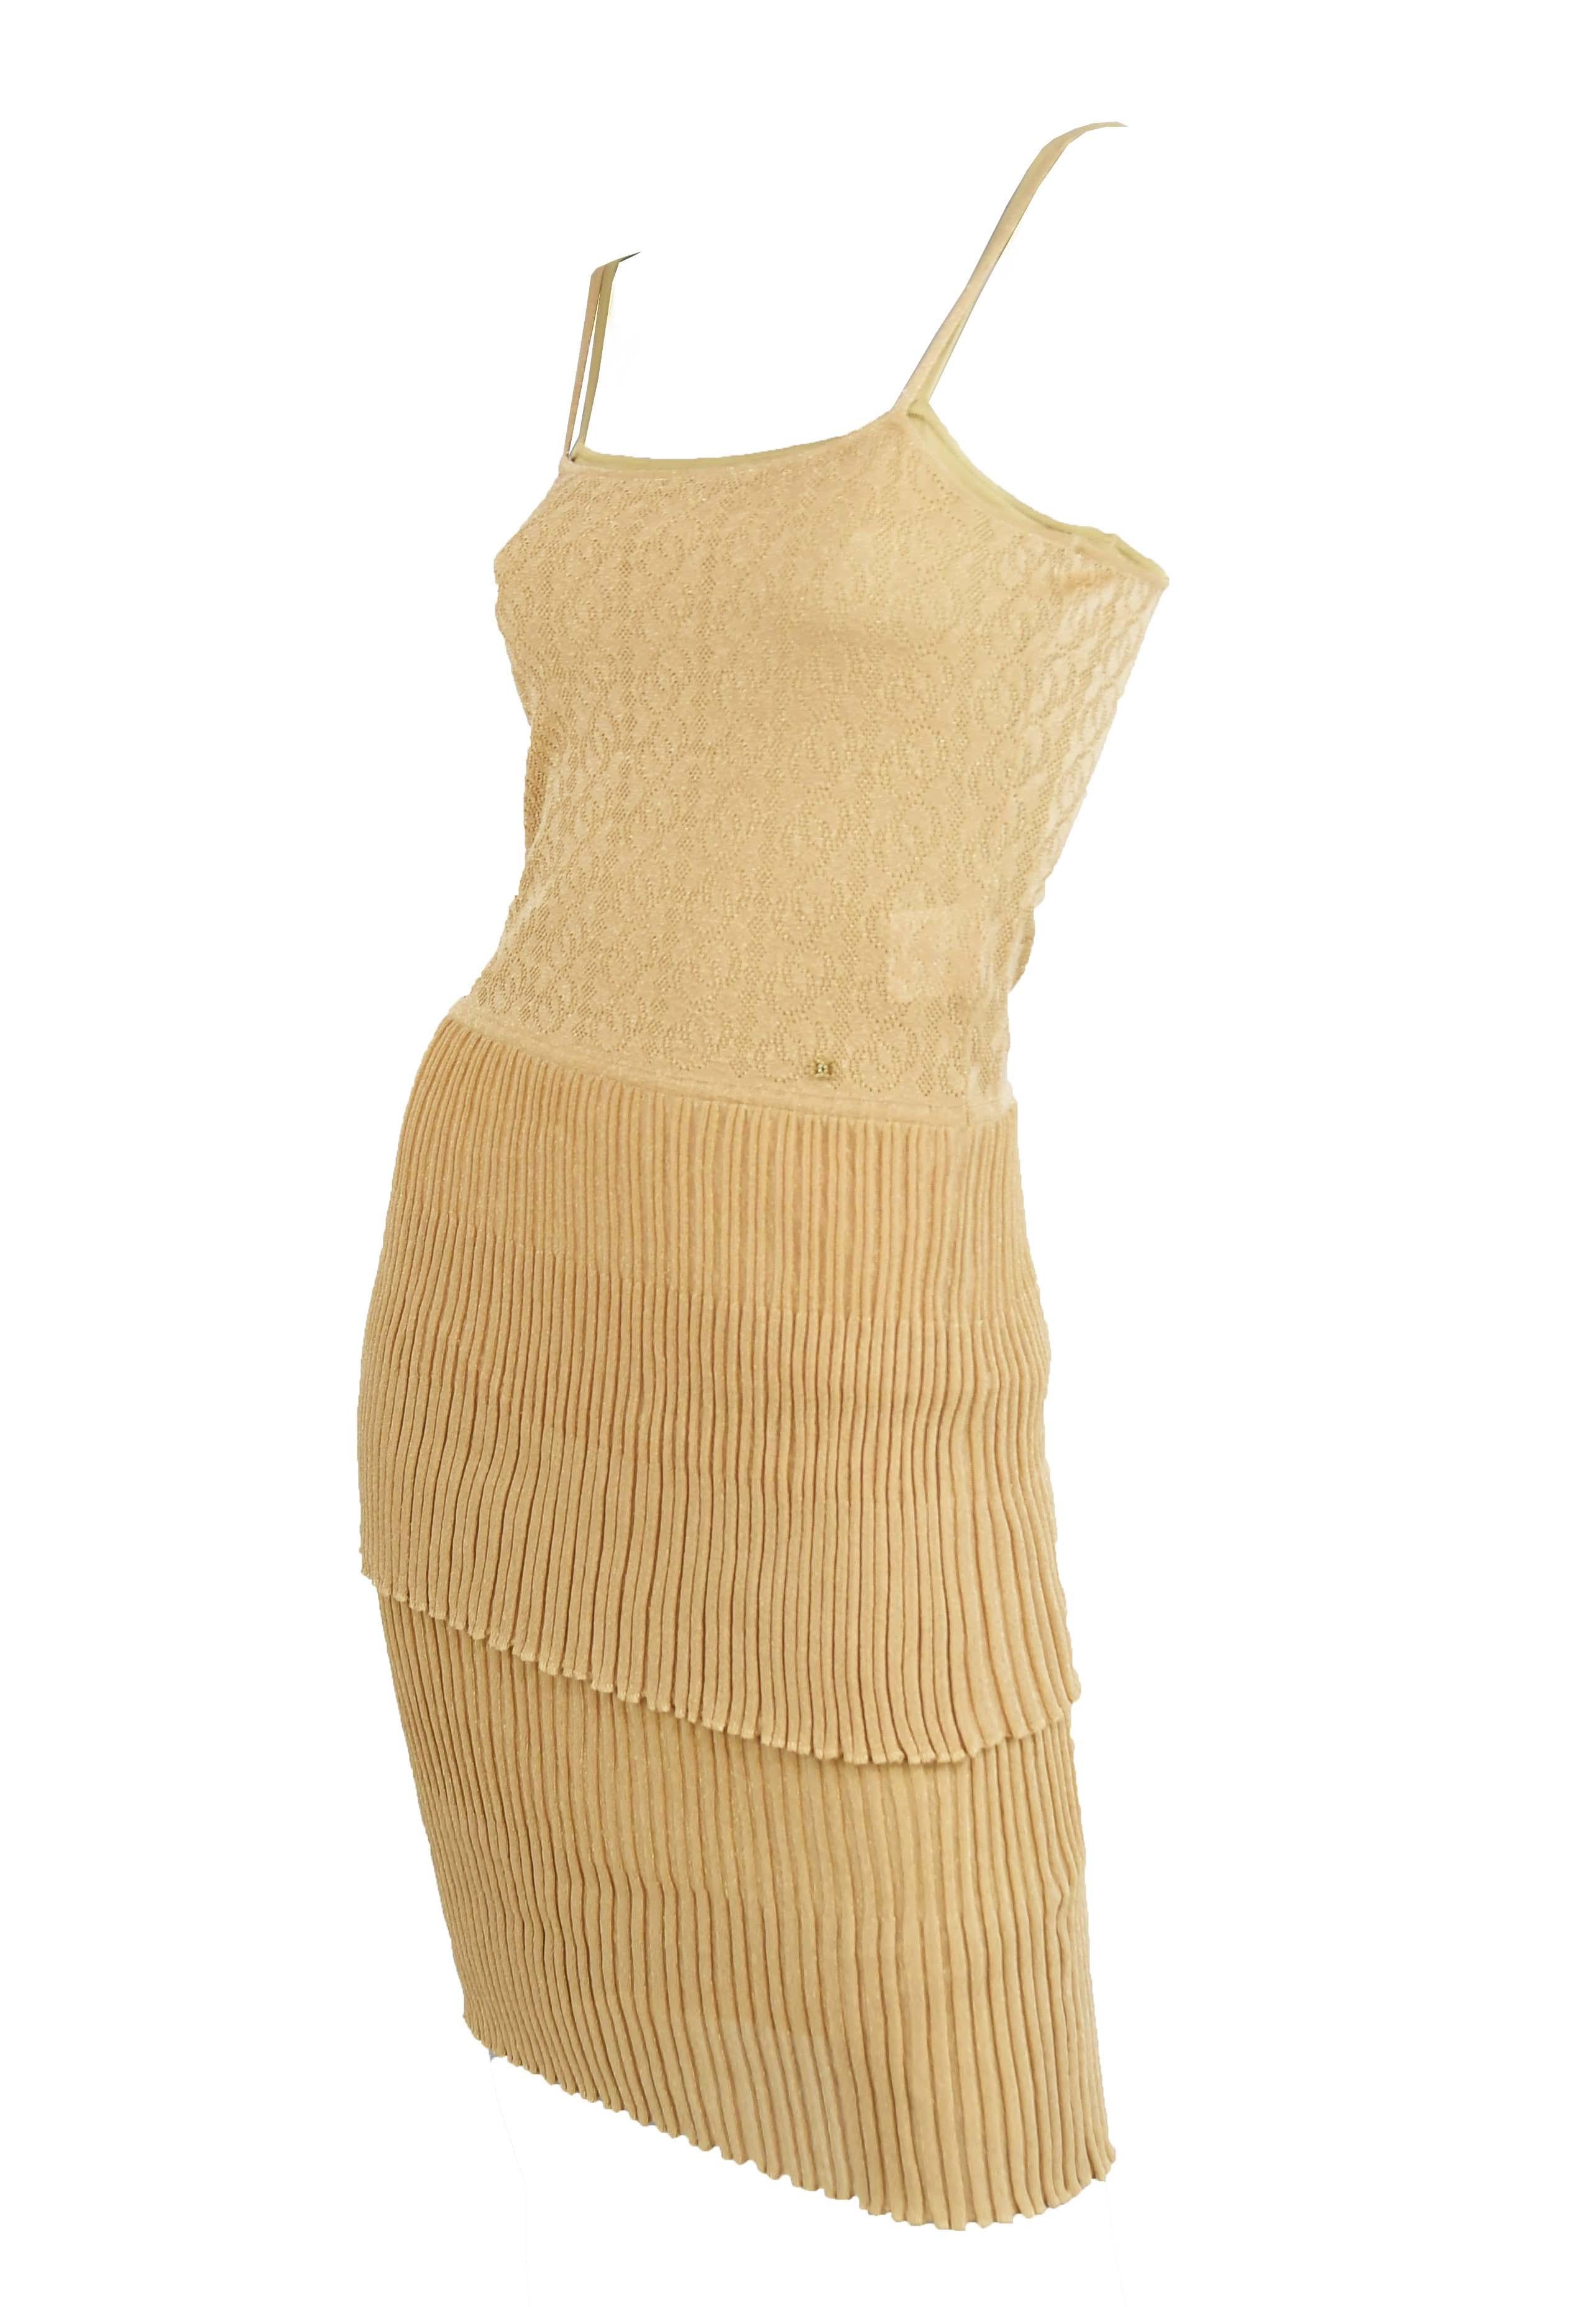 Chanel gold knit spaghetti strap dress with two tiers of beautiful pleating.  Jeweled Chanel logo sewn into the bodice.

Size: FR 36

Condition: Pristine condition

Composition: 80% rayon, 20% polyester / (lining) 100% rayon

Care: Dry clean